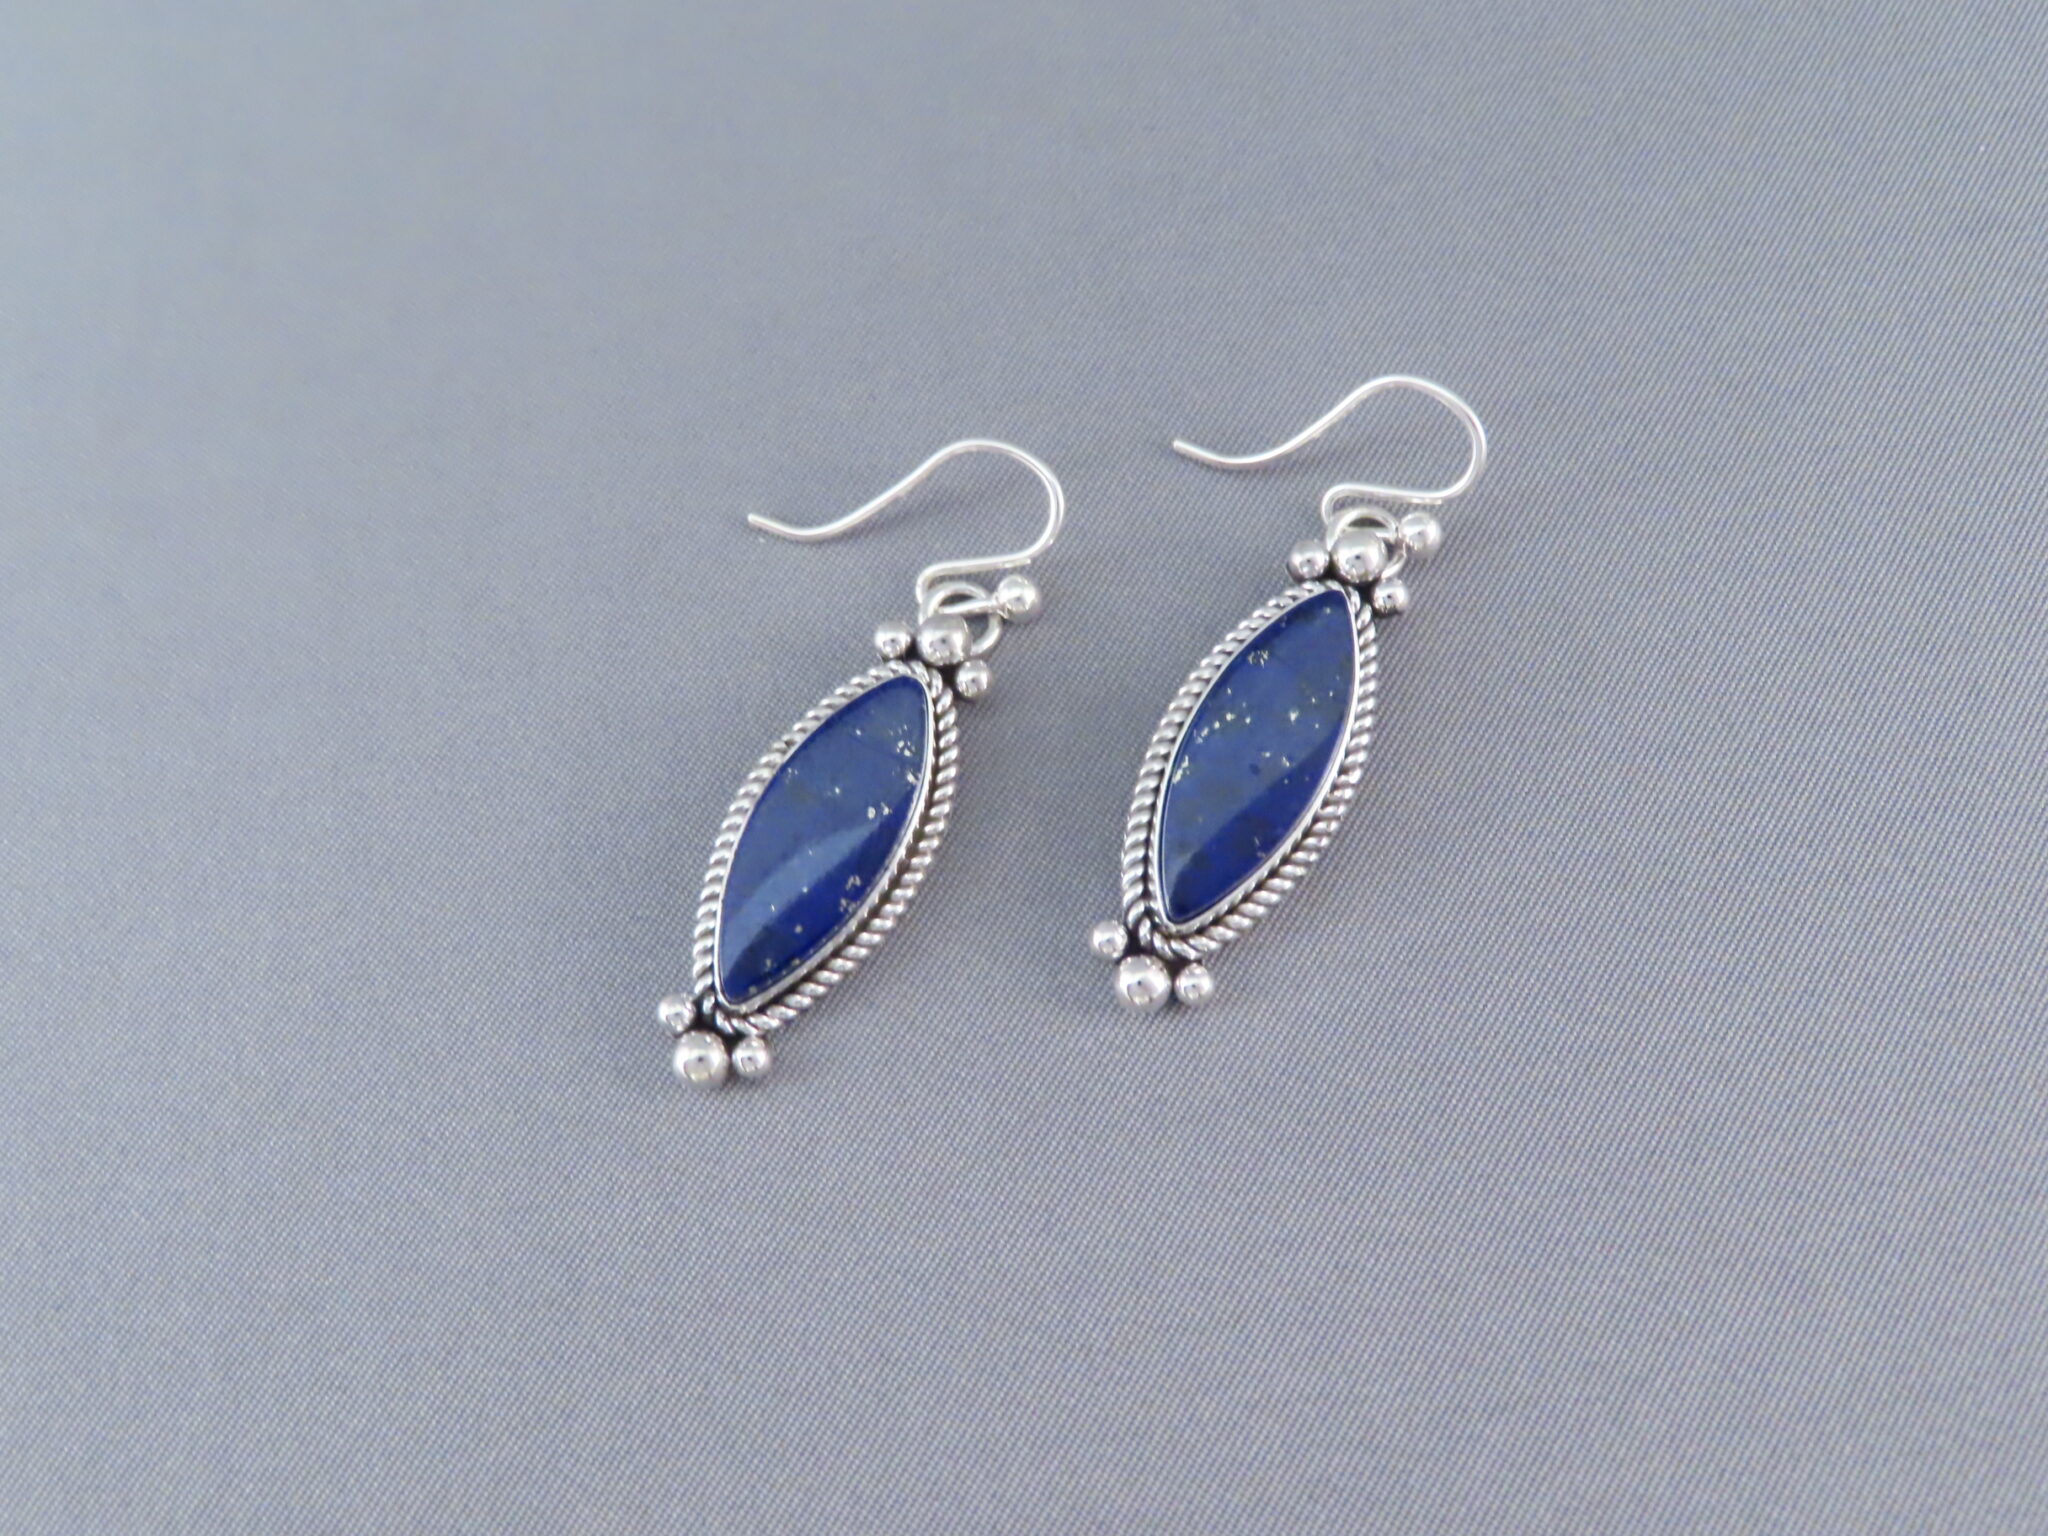 Sterling Silver & Lapis Earrings by Artie Yellowhorse - Navajo Jewelry